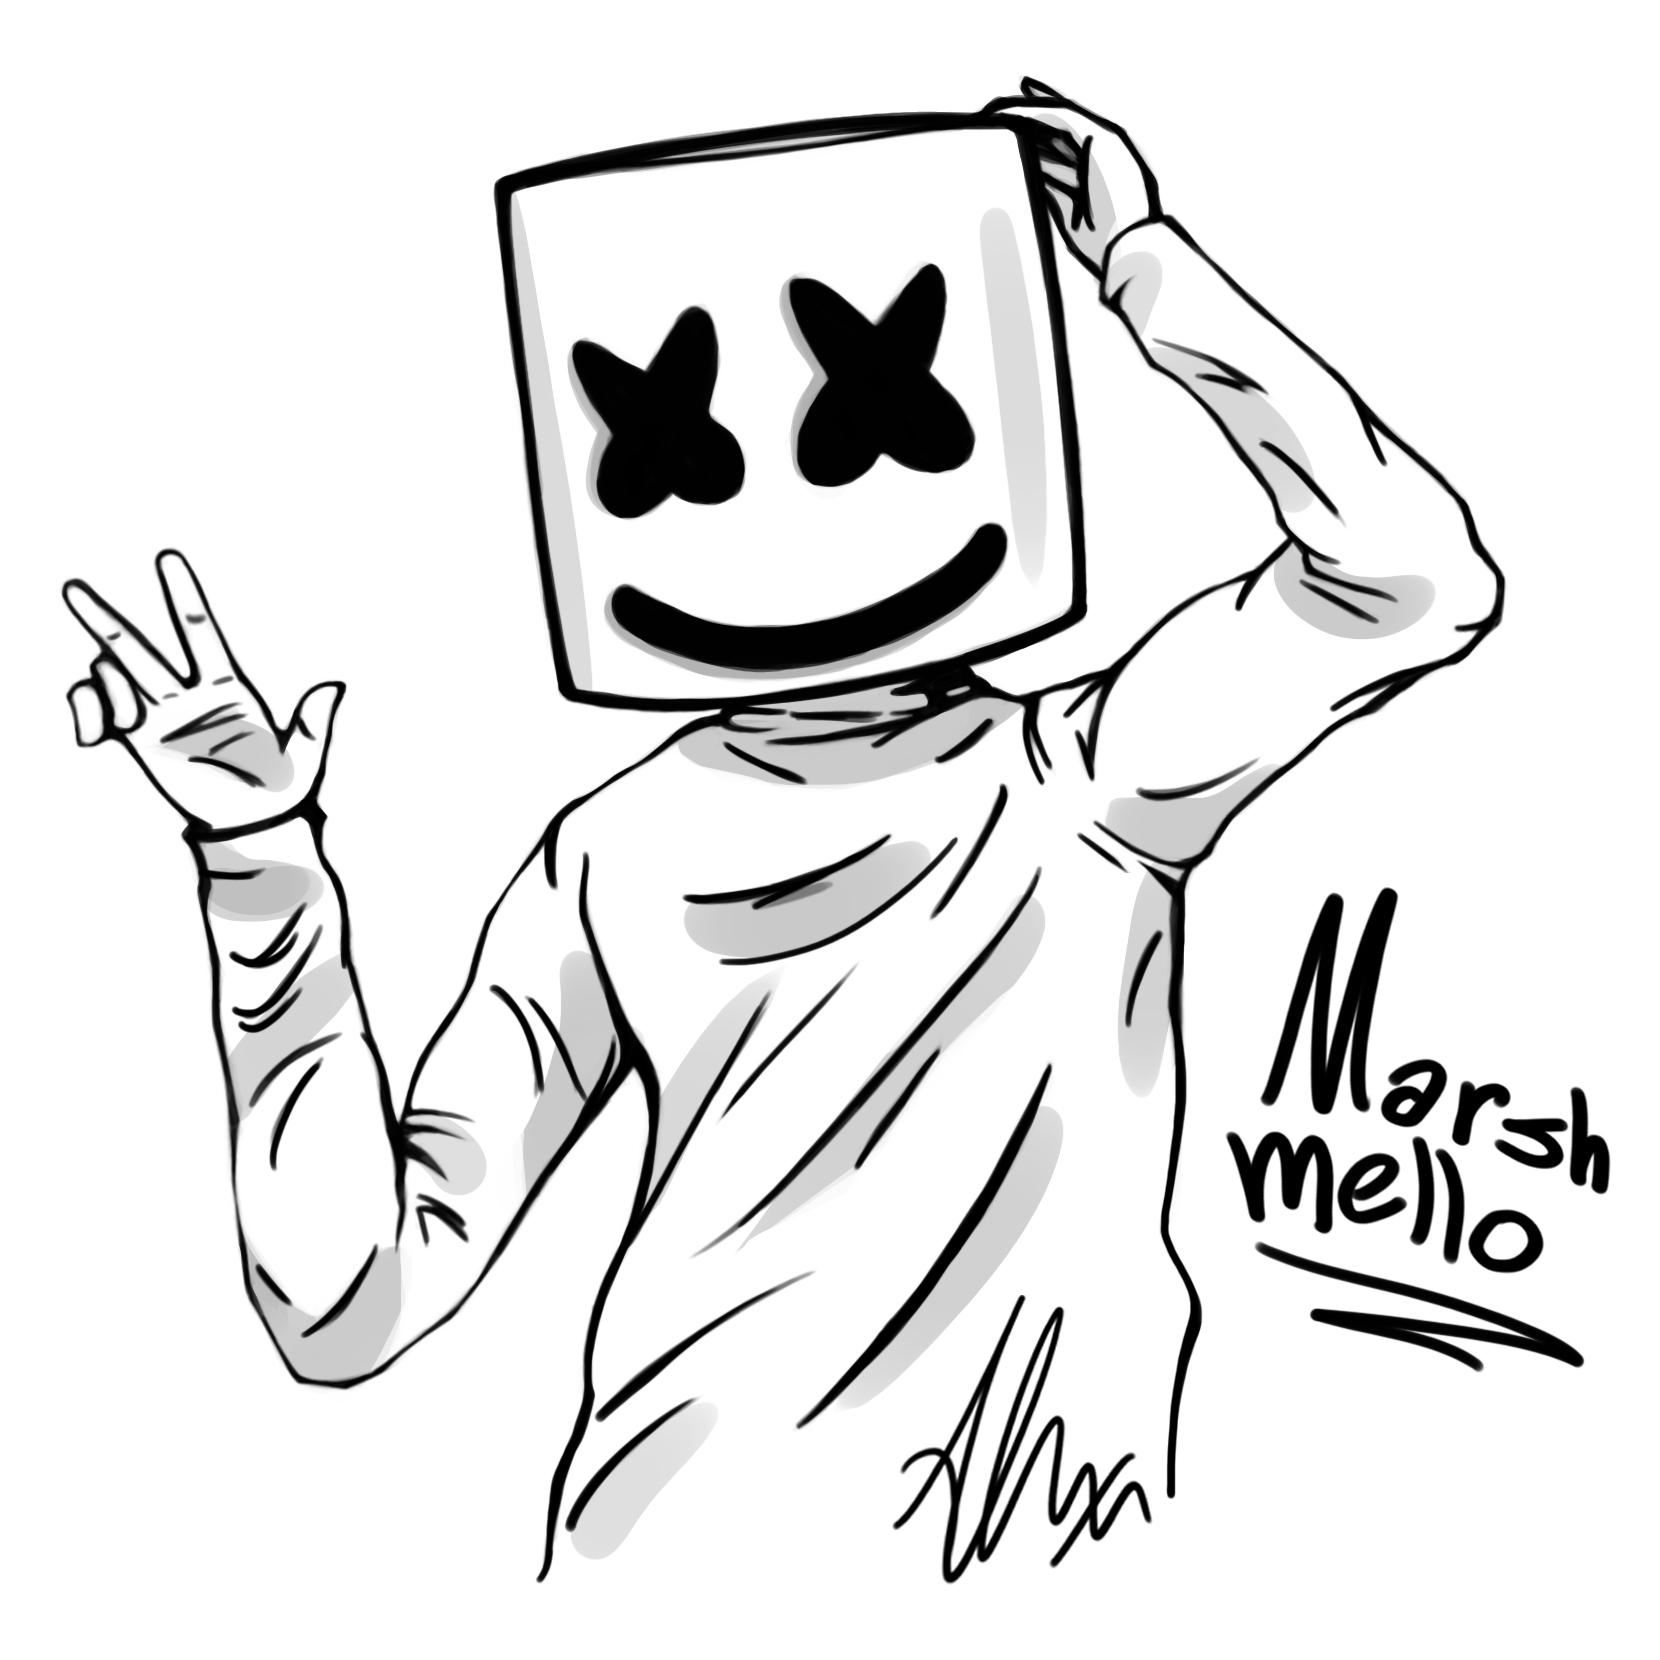 Dj drawing mello for free download on Ayoqq.org